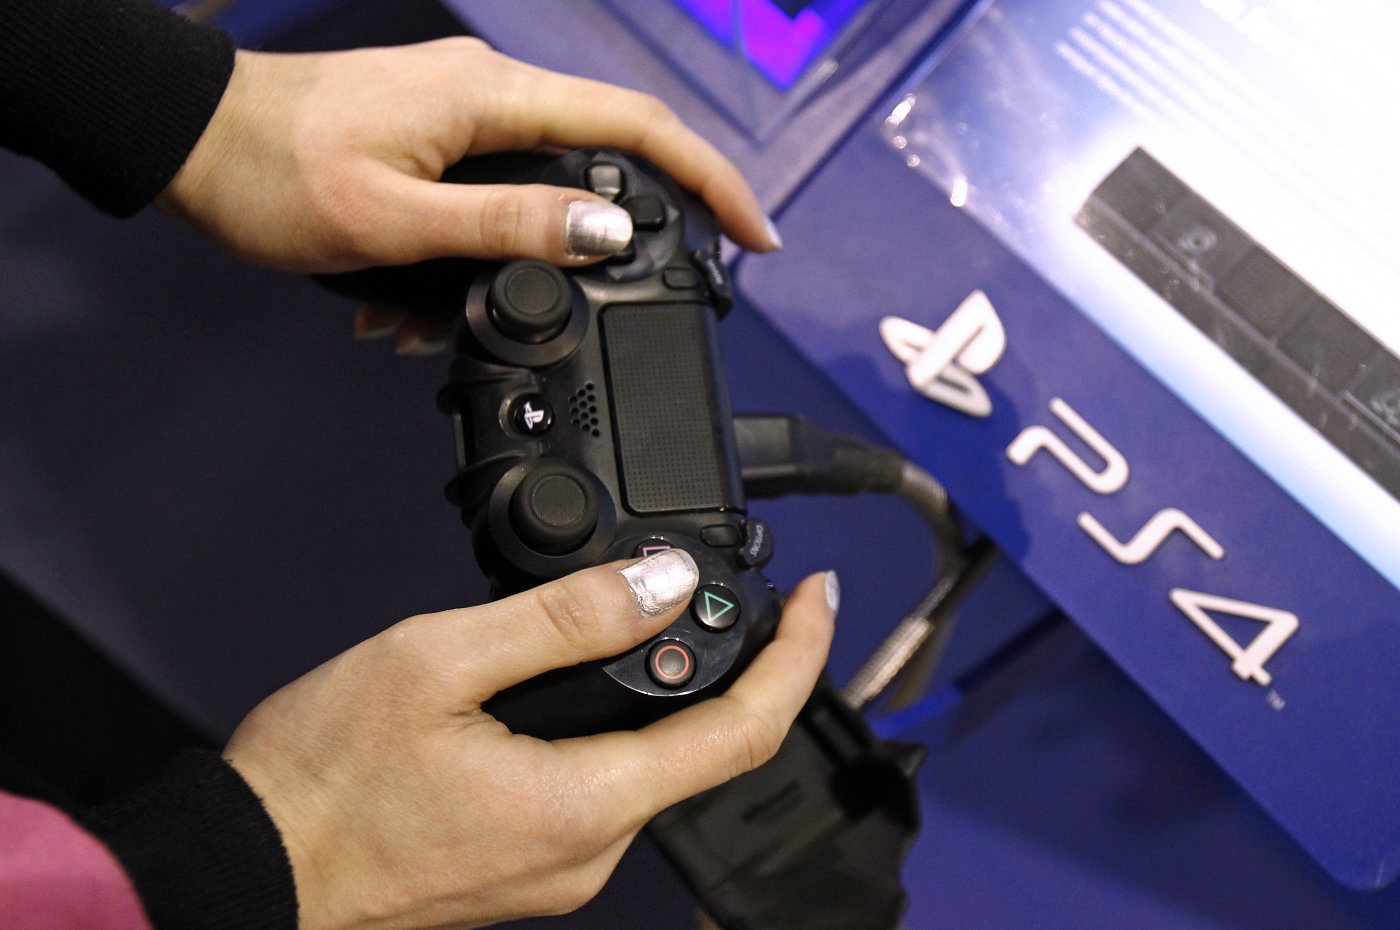 Sony is reportedly developing a 'PlayStation 4.5' for 4K gaming